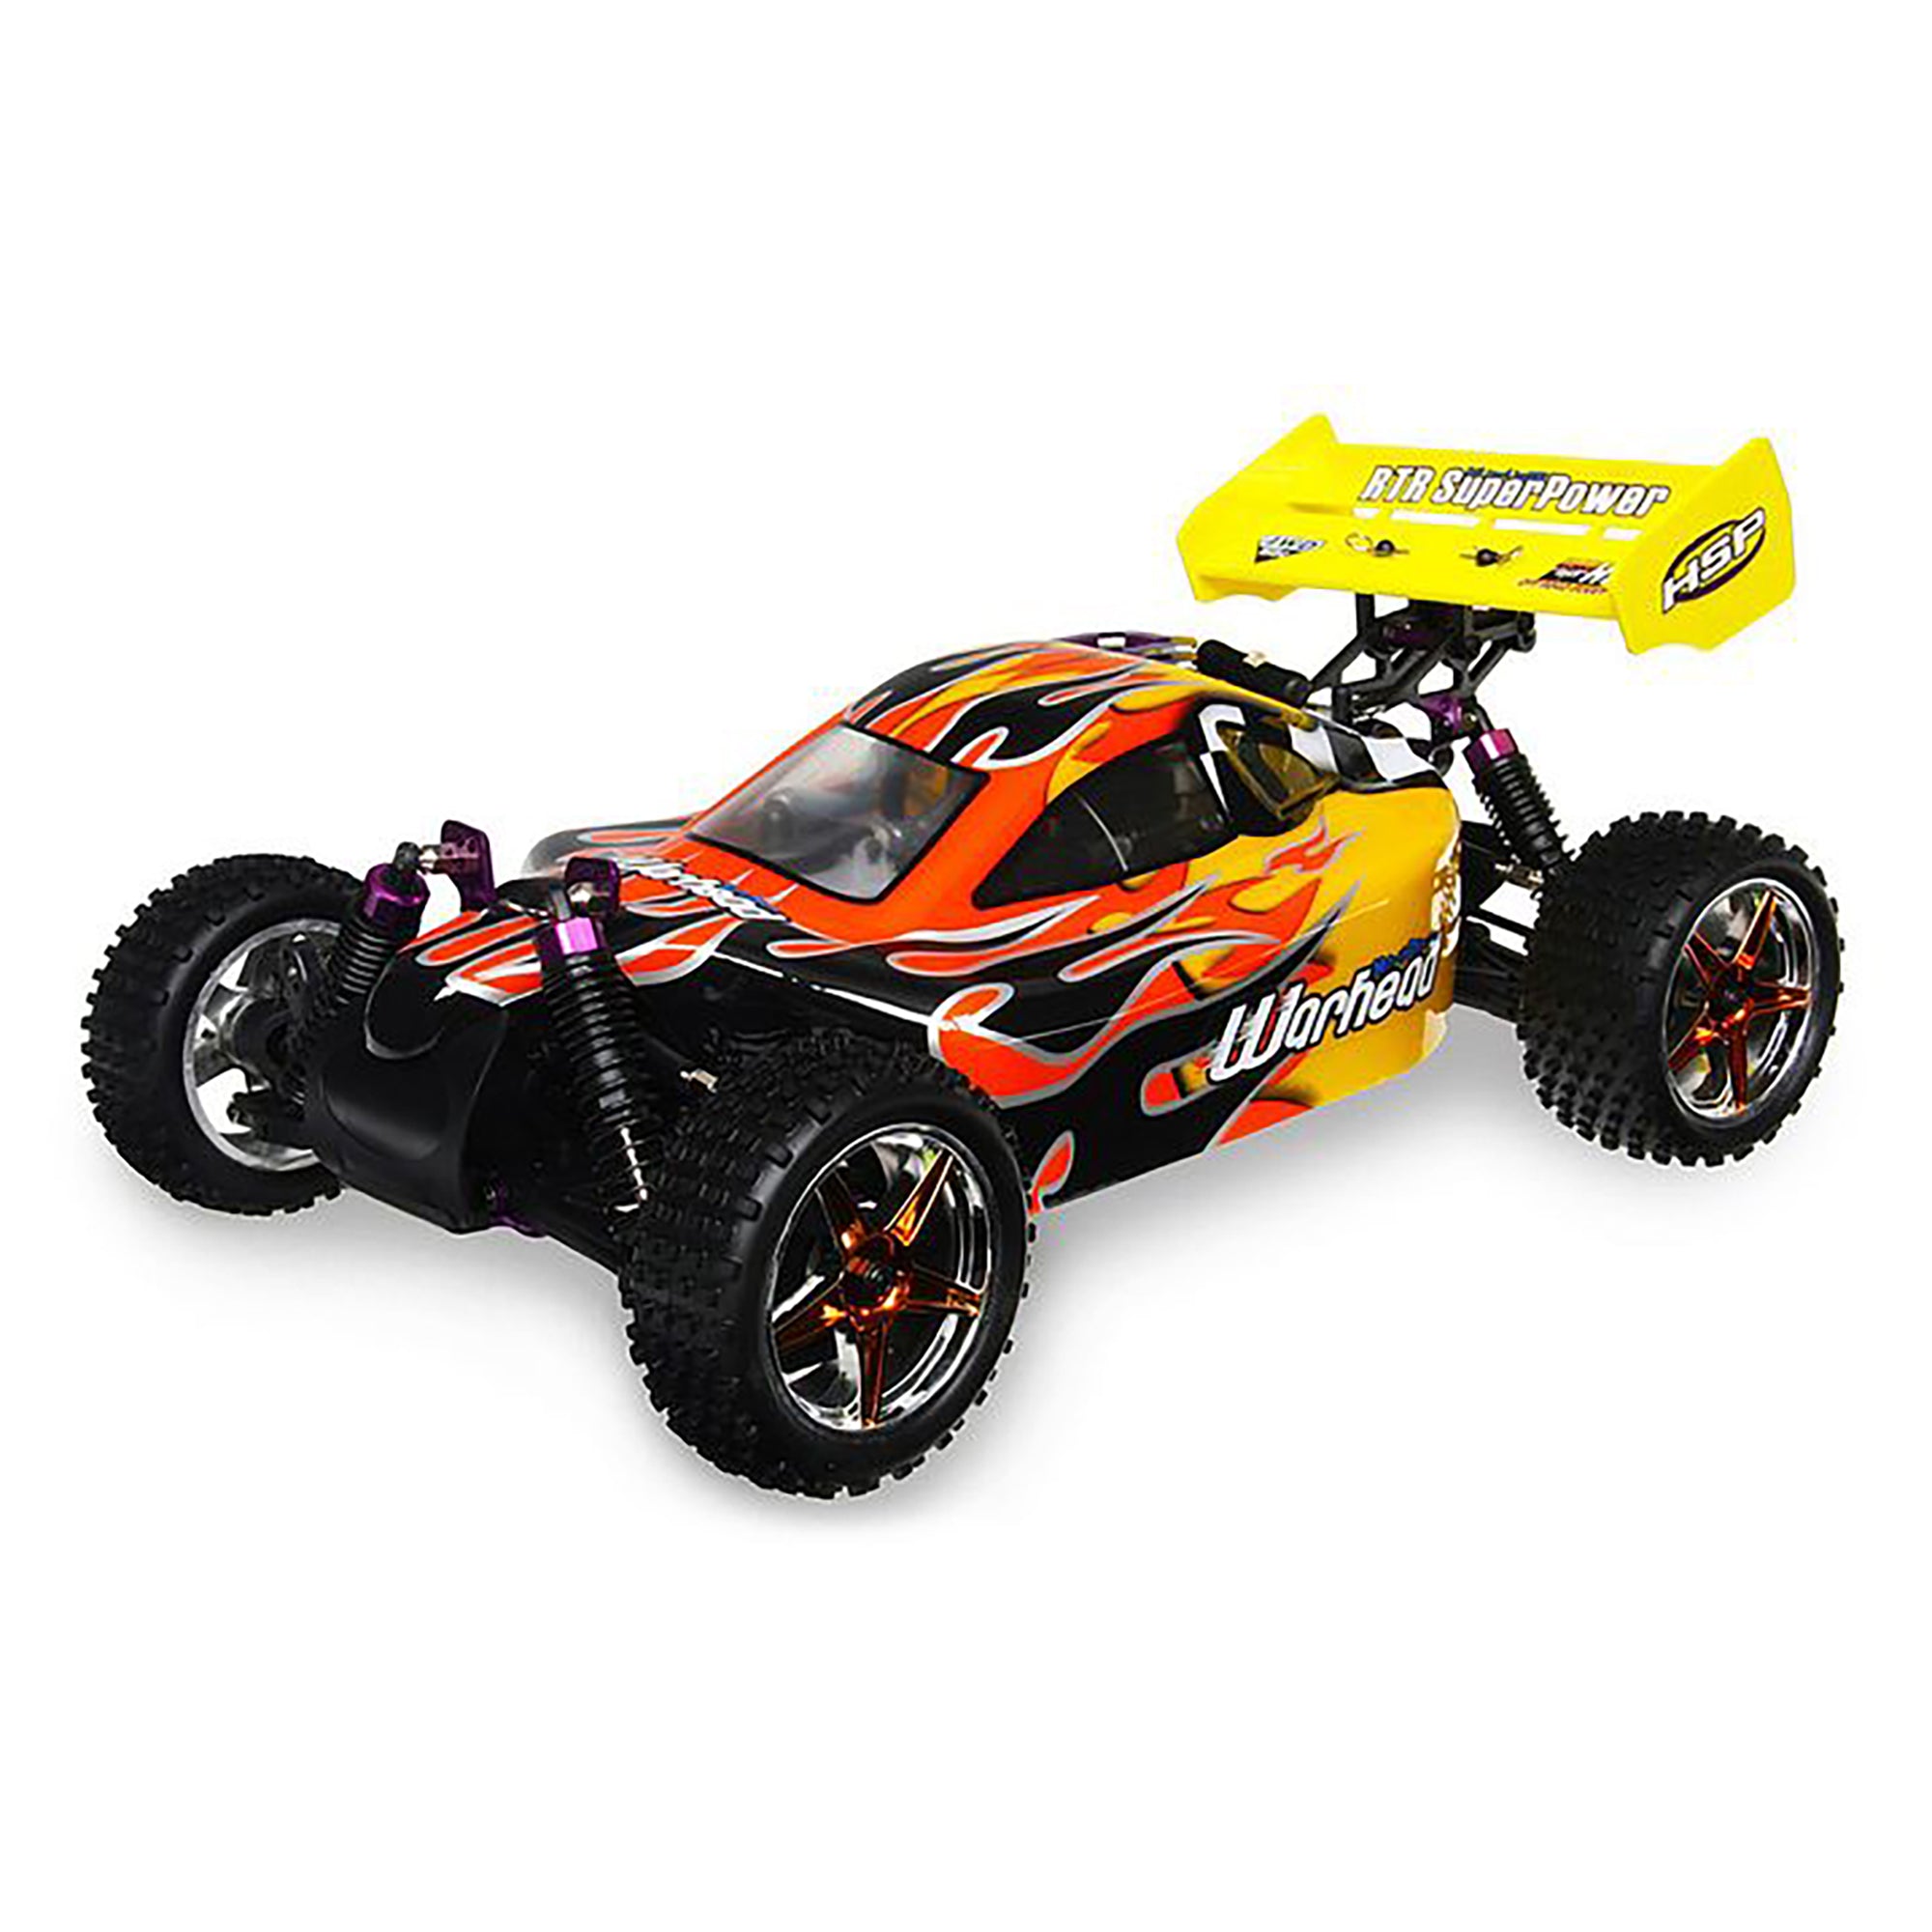 HSP Racing 94106-66001 Orange 2.4Ghz 2SP Nitro 4WD Off Road 1/10 Scale RC Buggy